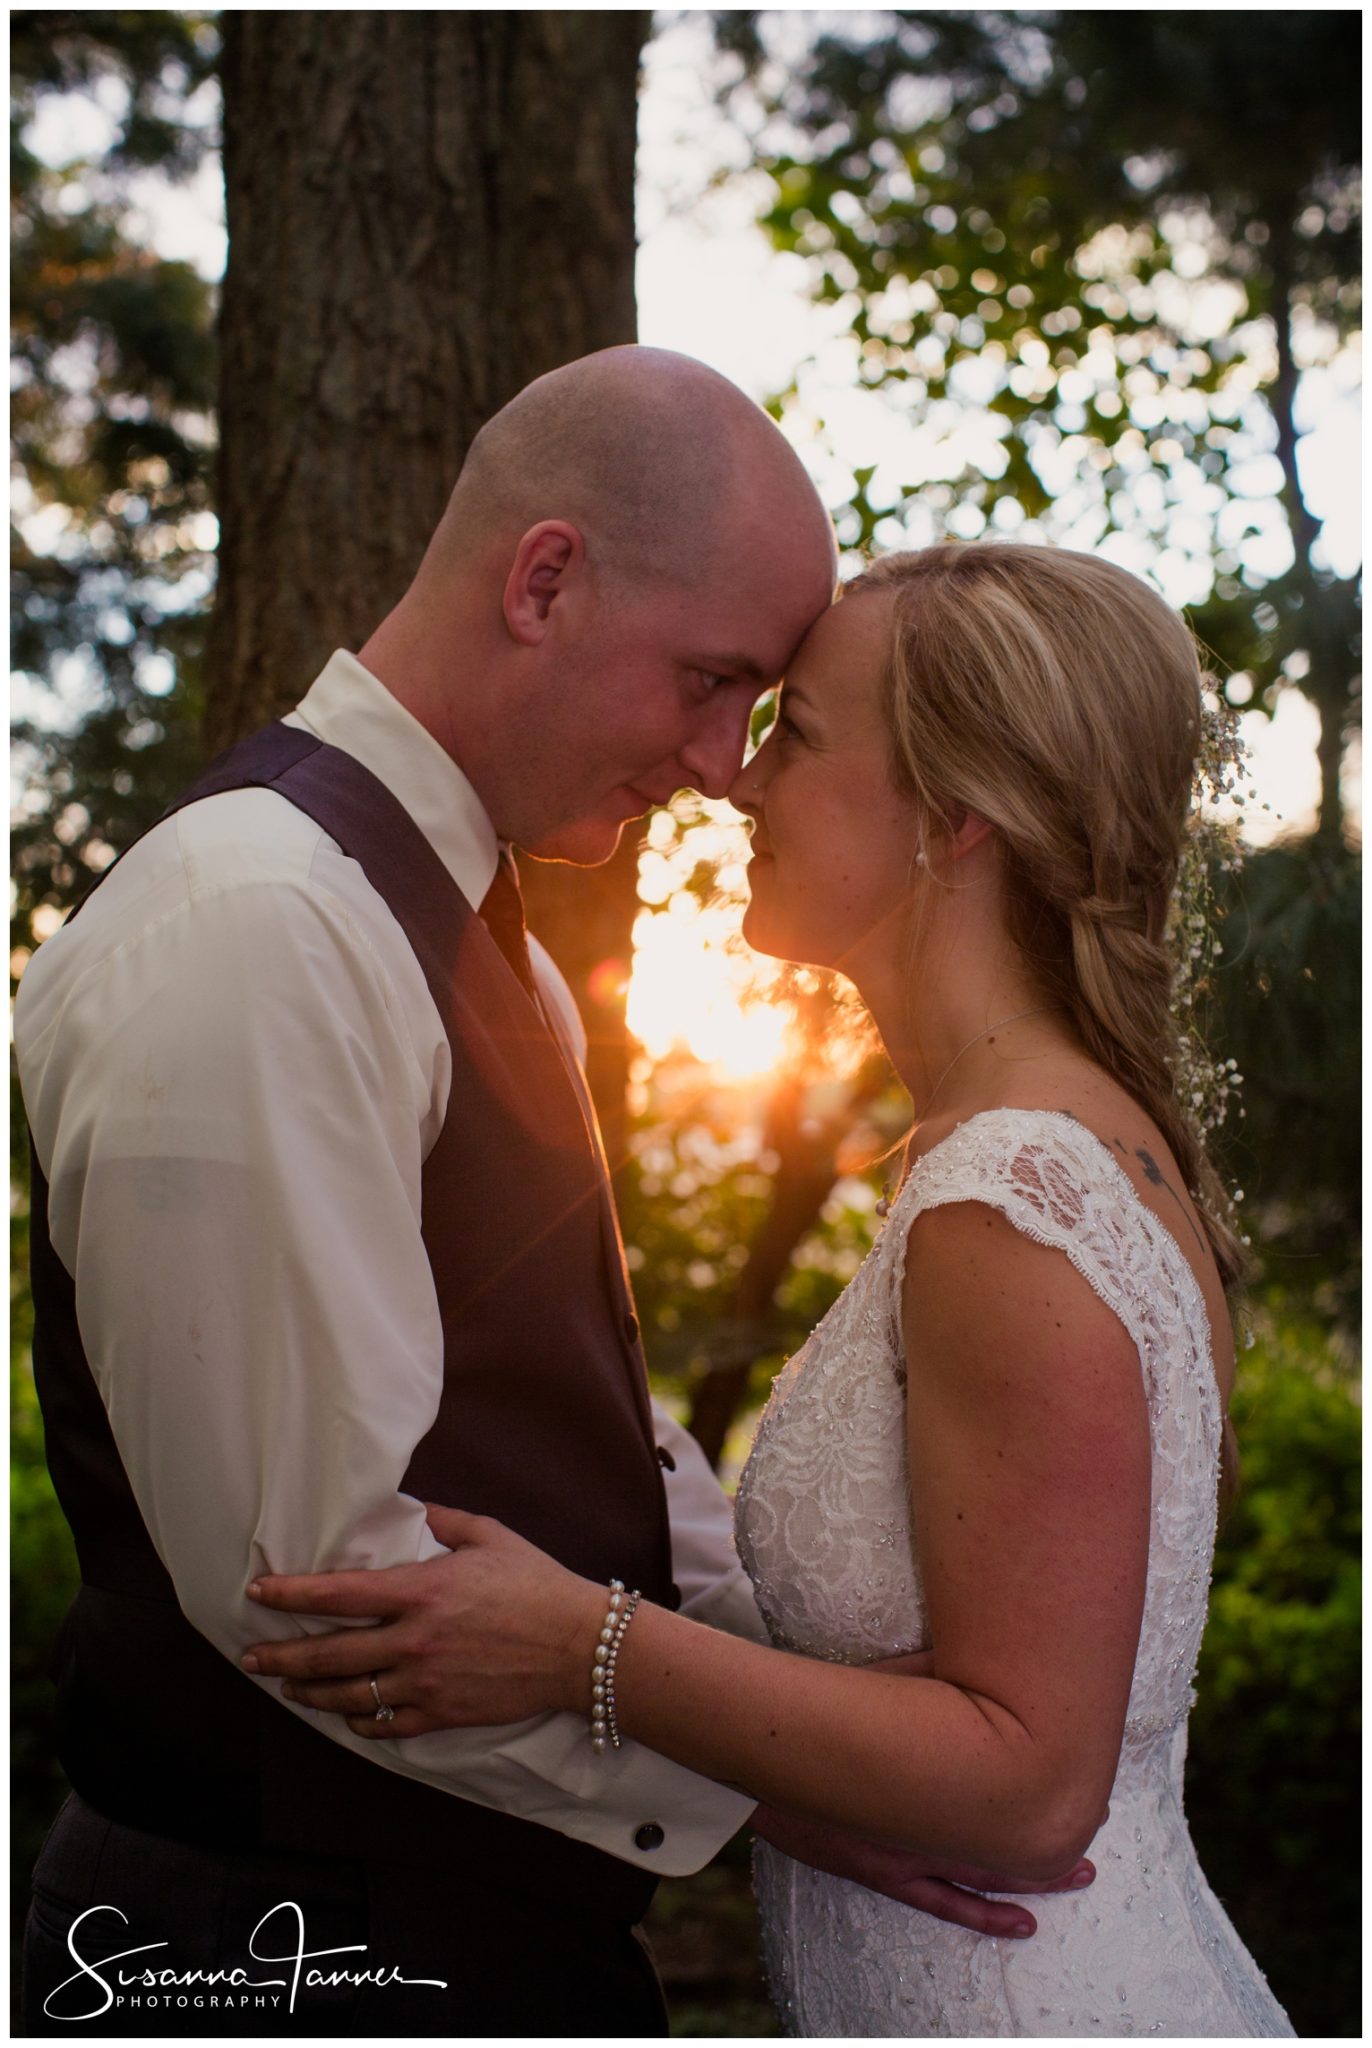 Indianapolis Outdoor Wedding, bride and groom portrait with sunset behind them casting a nice orange glow